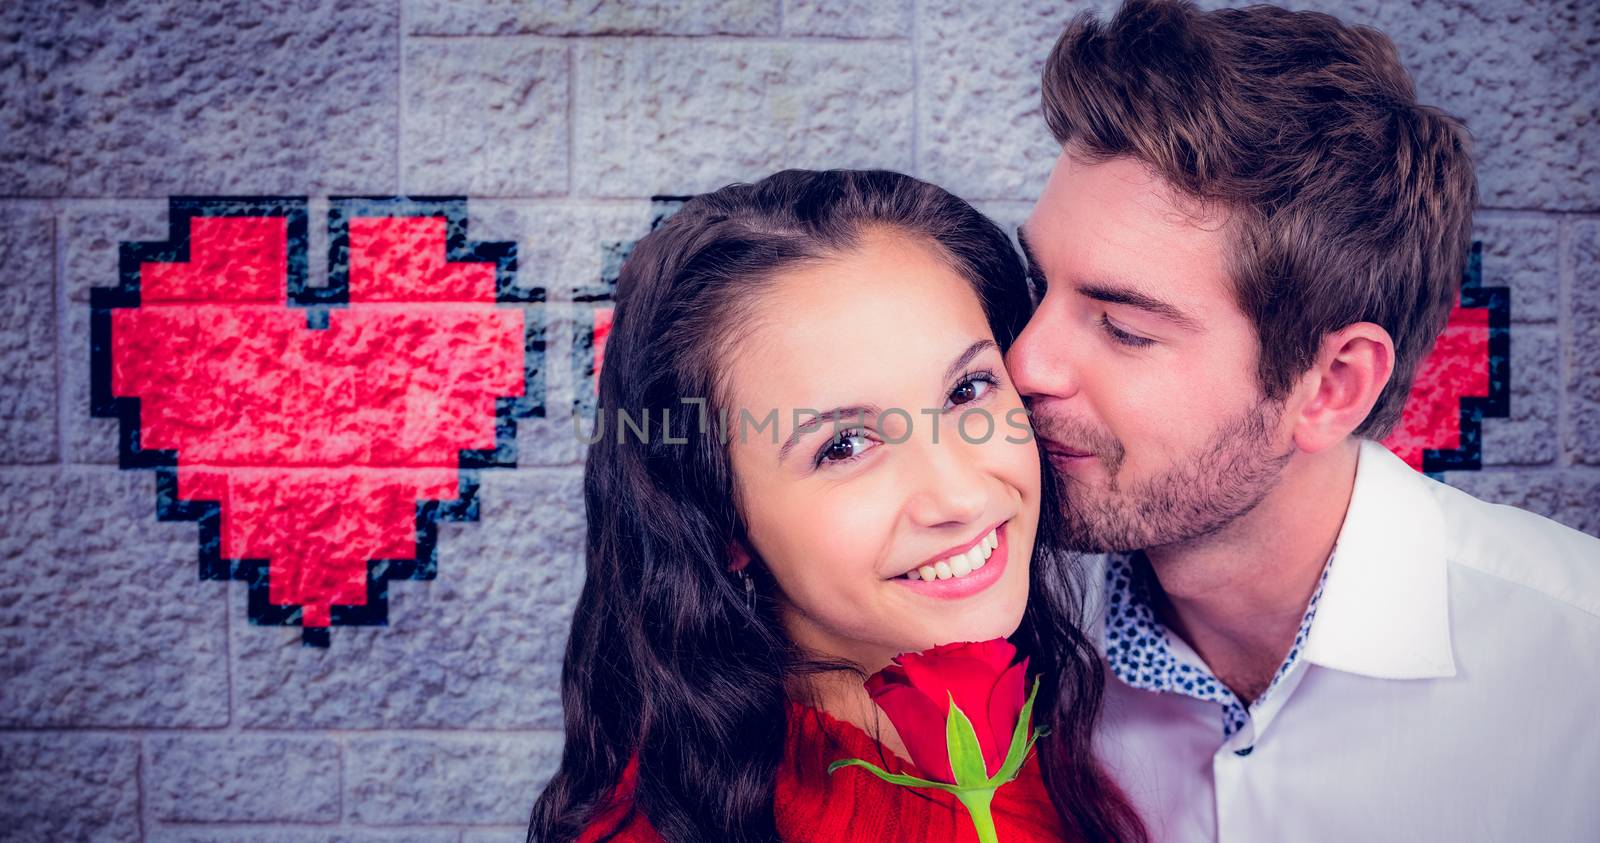 Smiling couple holding rose against grey brick wall